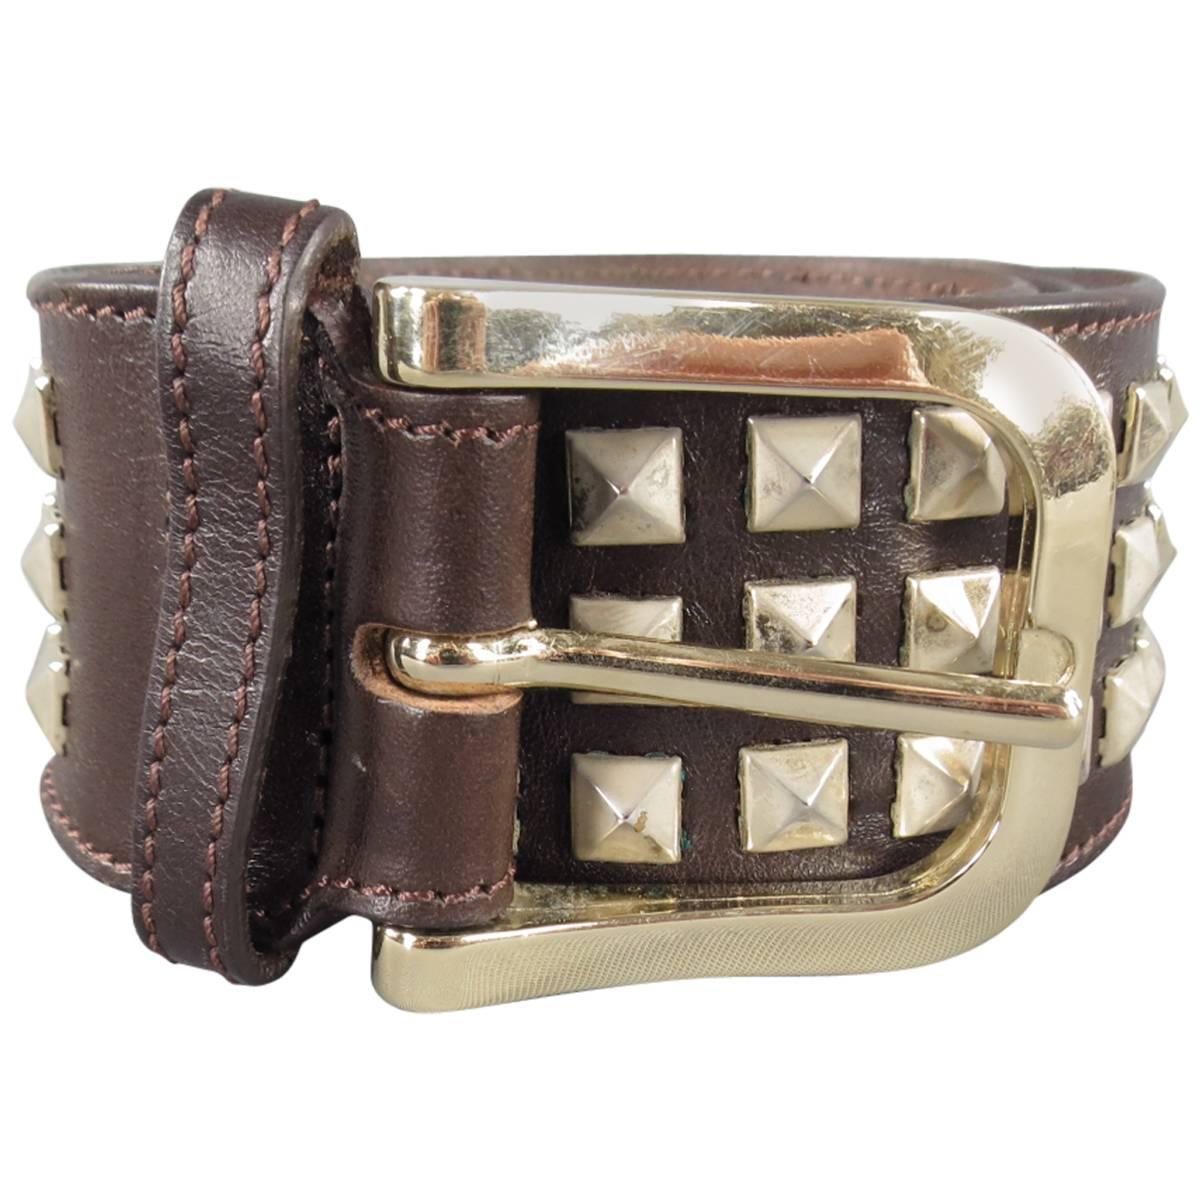 BURBERRY Belt - Size 40 Brown Leather Pyramid Studded